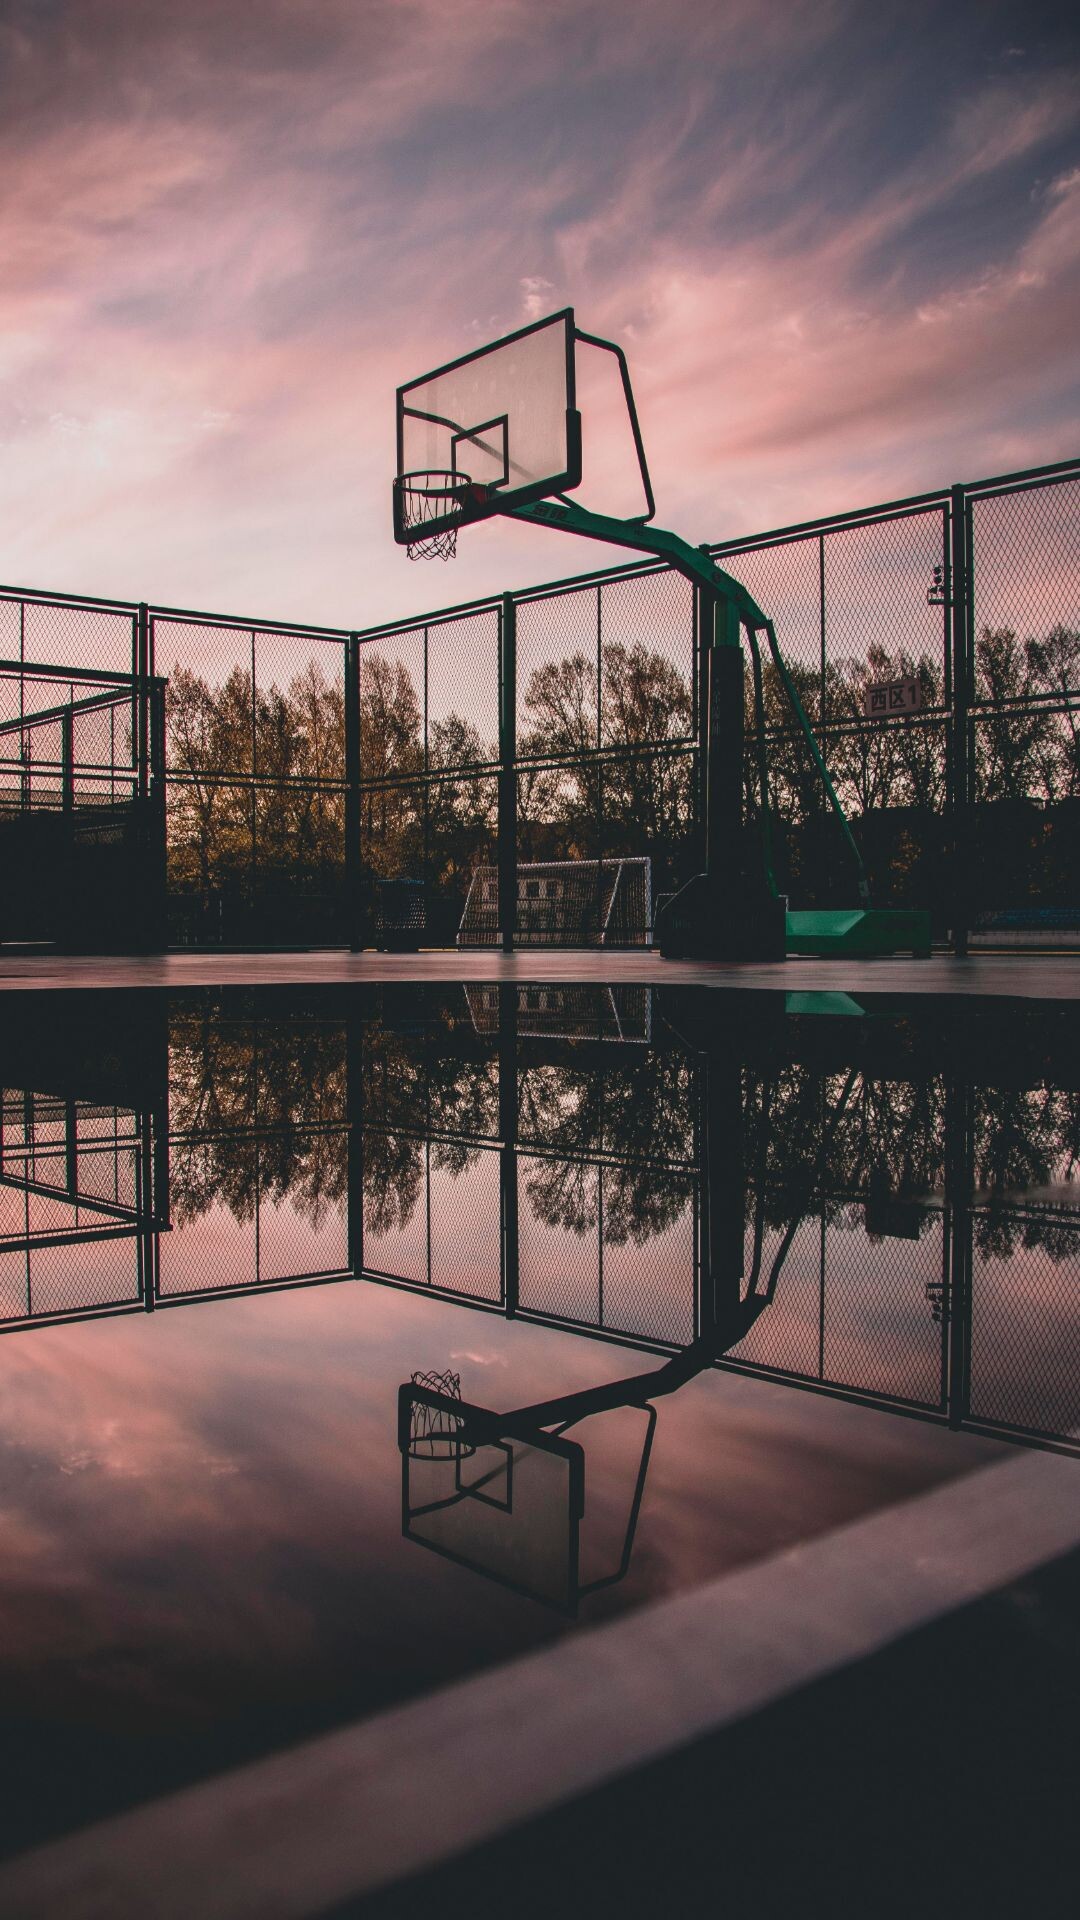 Goal (Sports): Basketball, A backboard, A piece of basketball equipment, A raised vertical board with an attached basket. 1080x1920 Full HD Background.